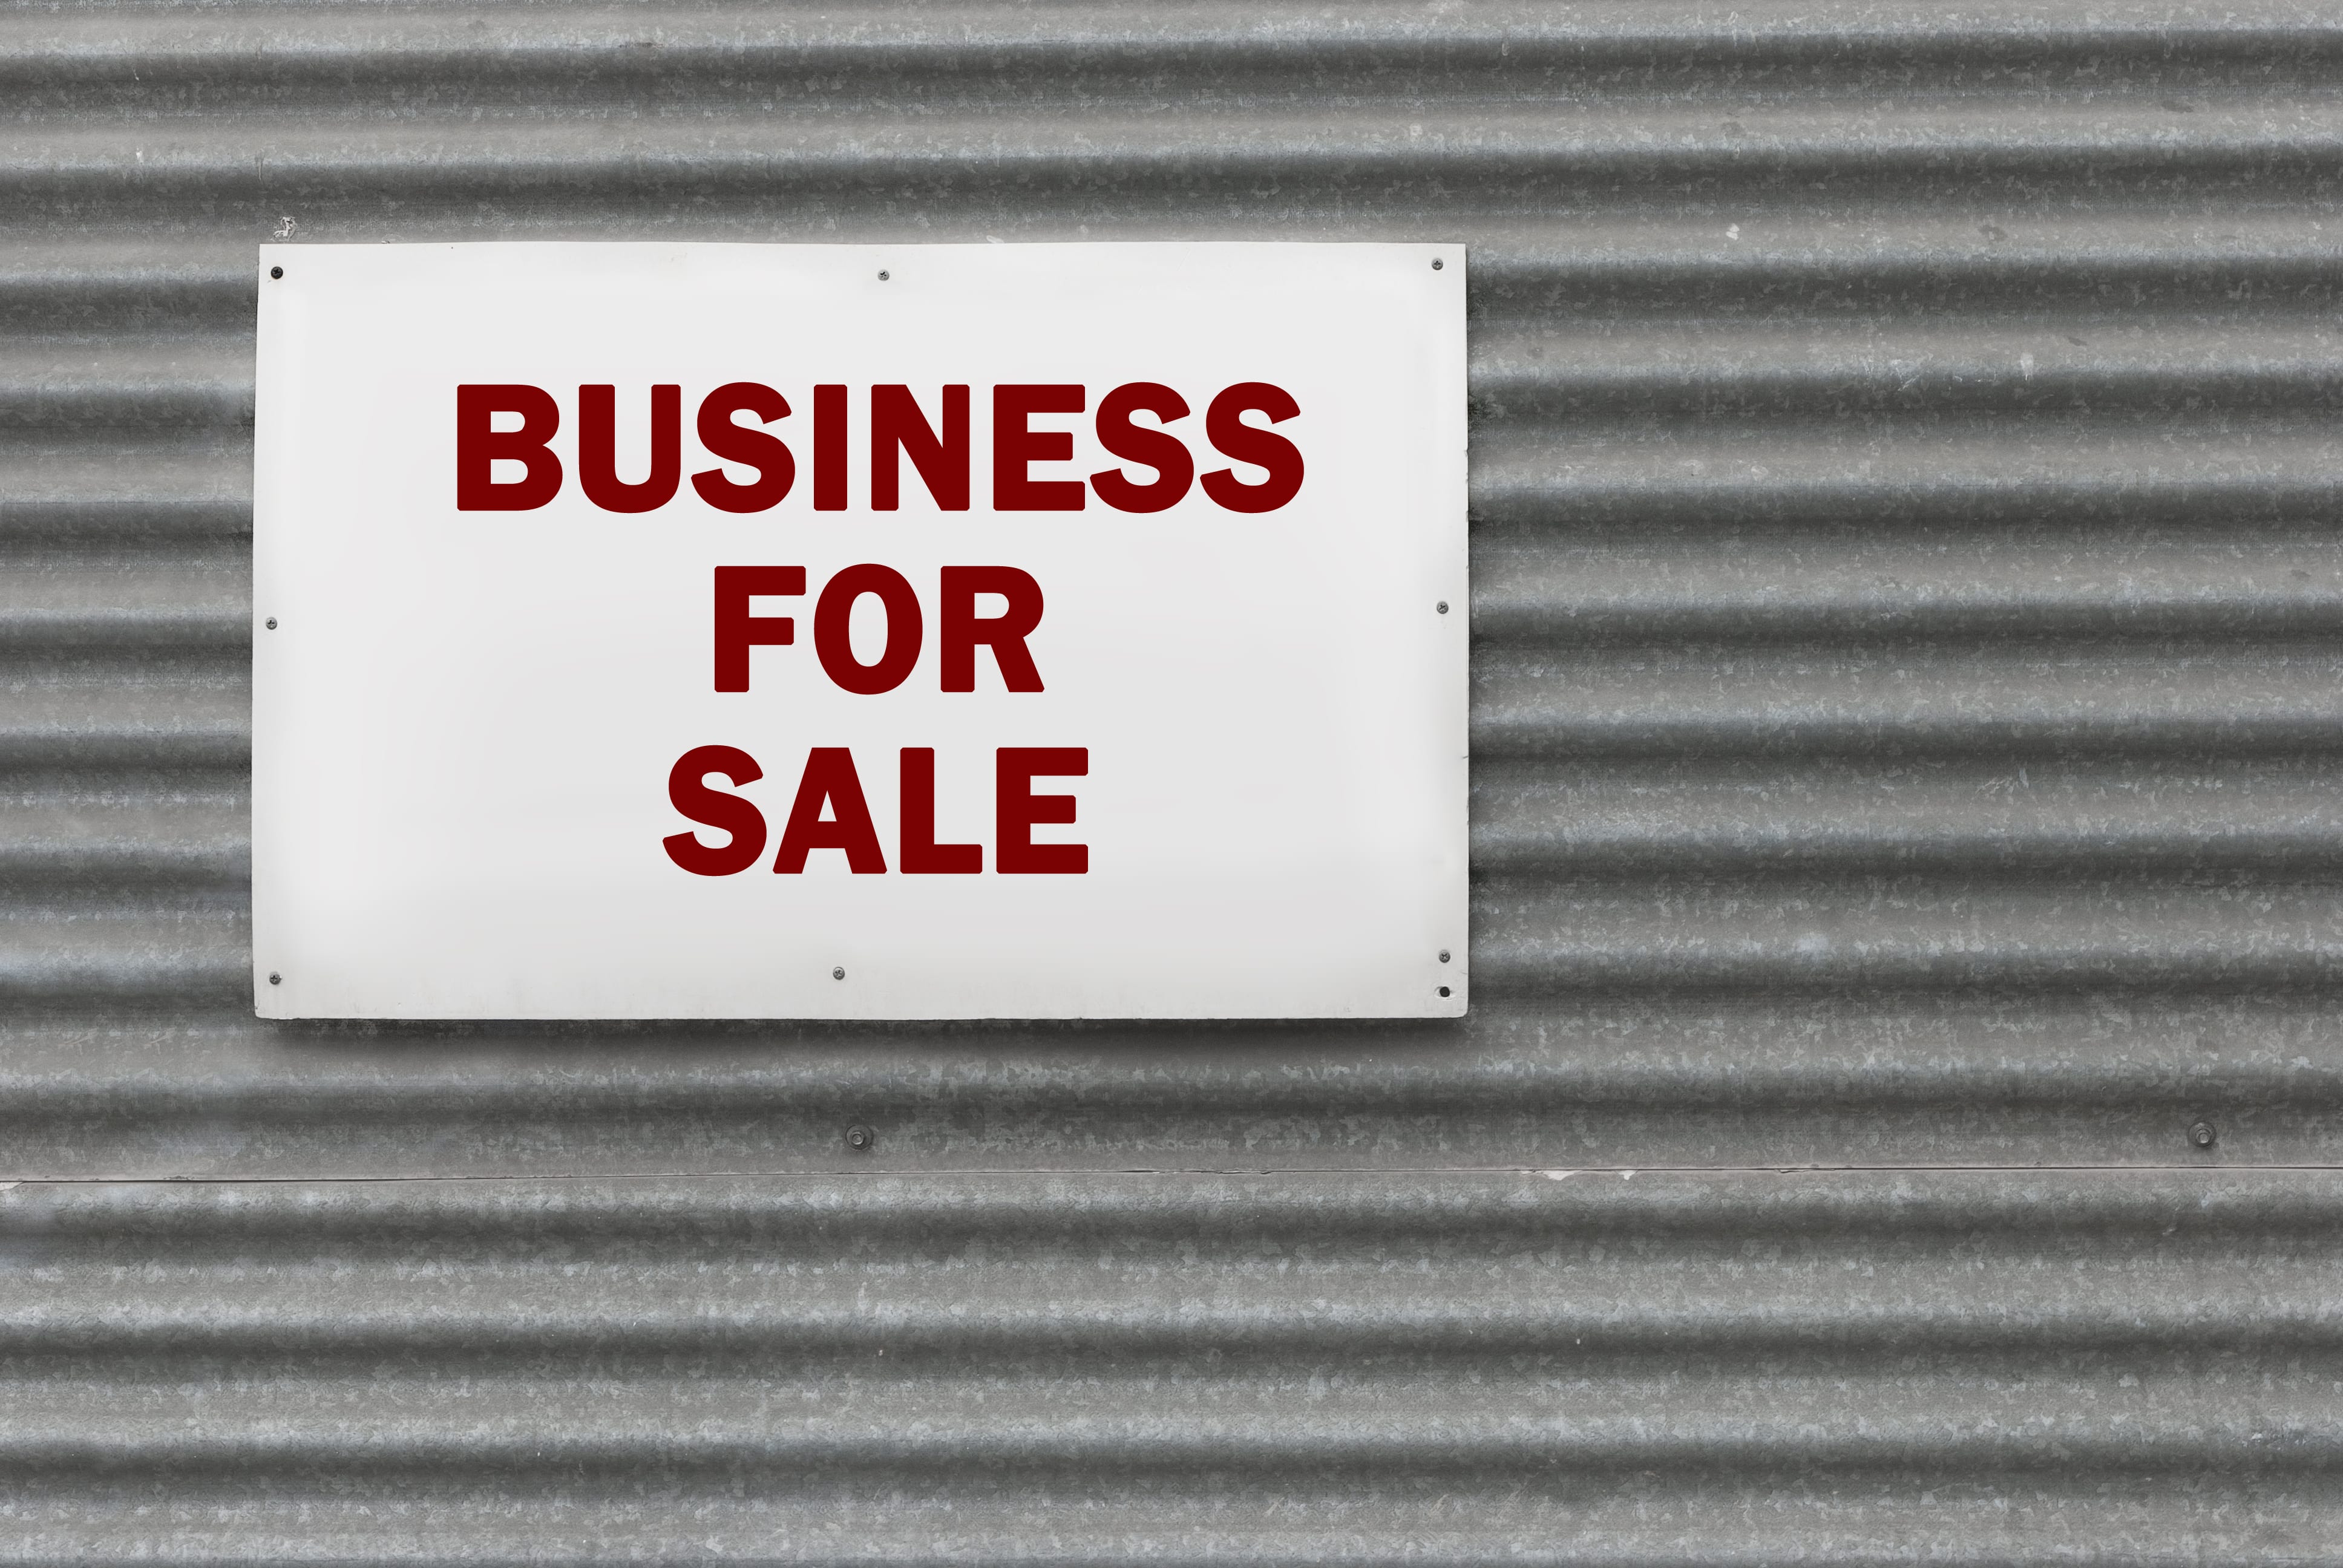 The Importance in Conducting Proper Due Diligence during a Business Sale